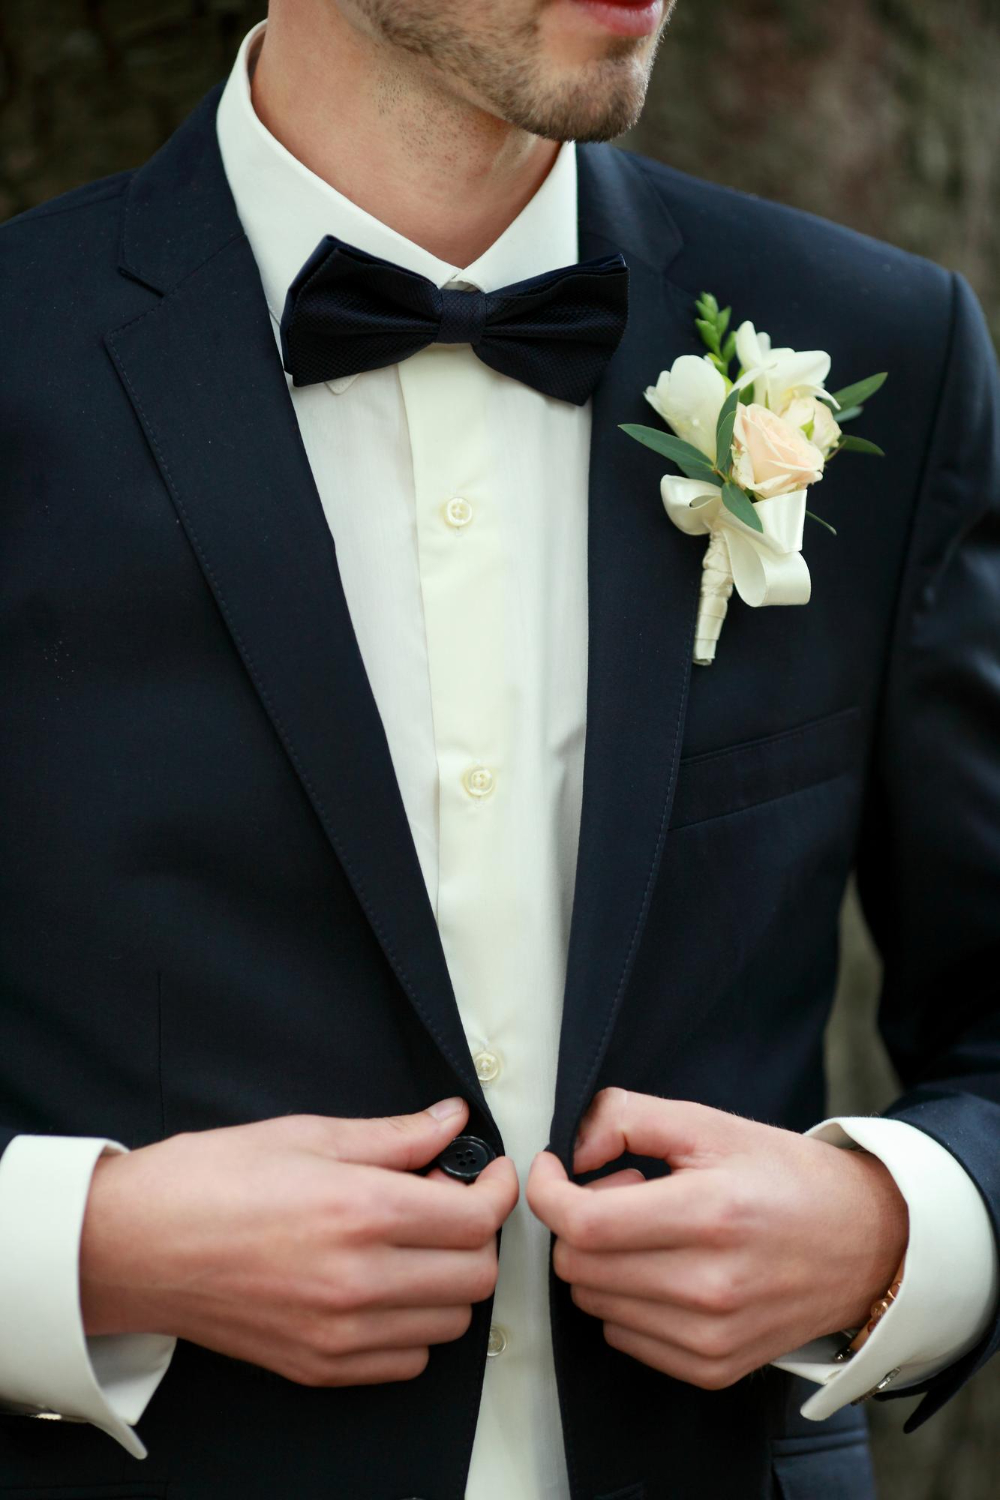 posed groom with button holewedding details beautiful boutonniere men's details